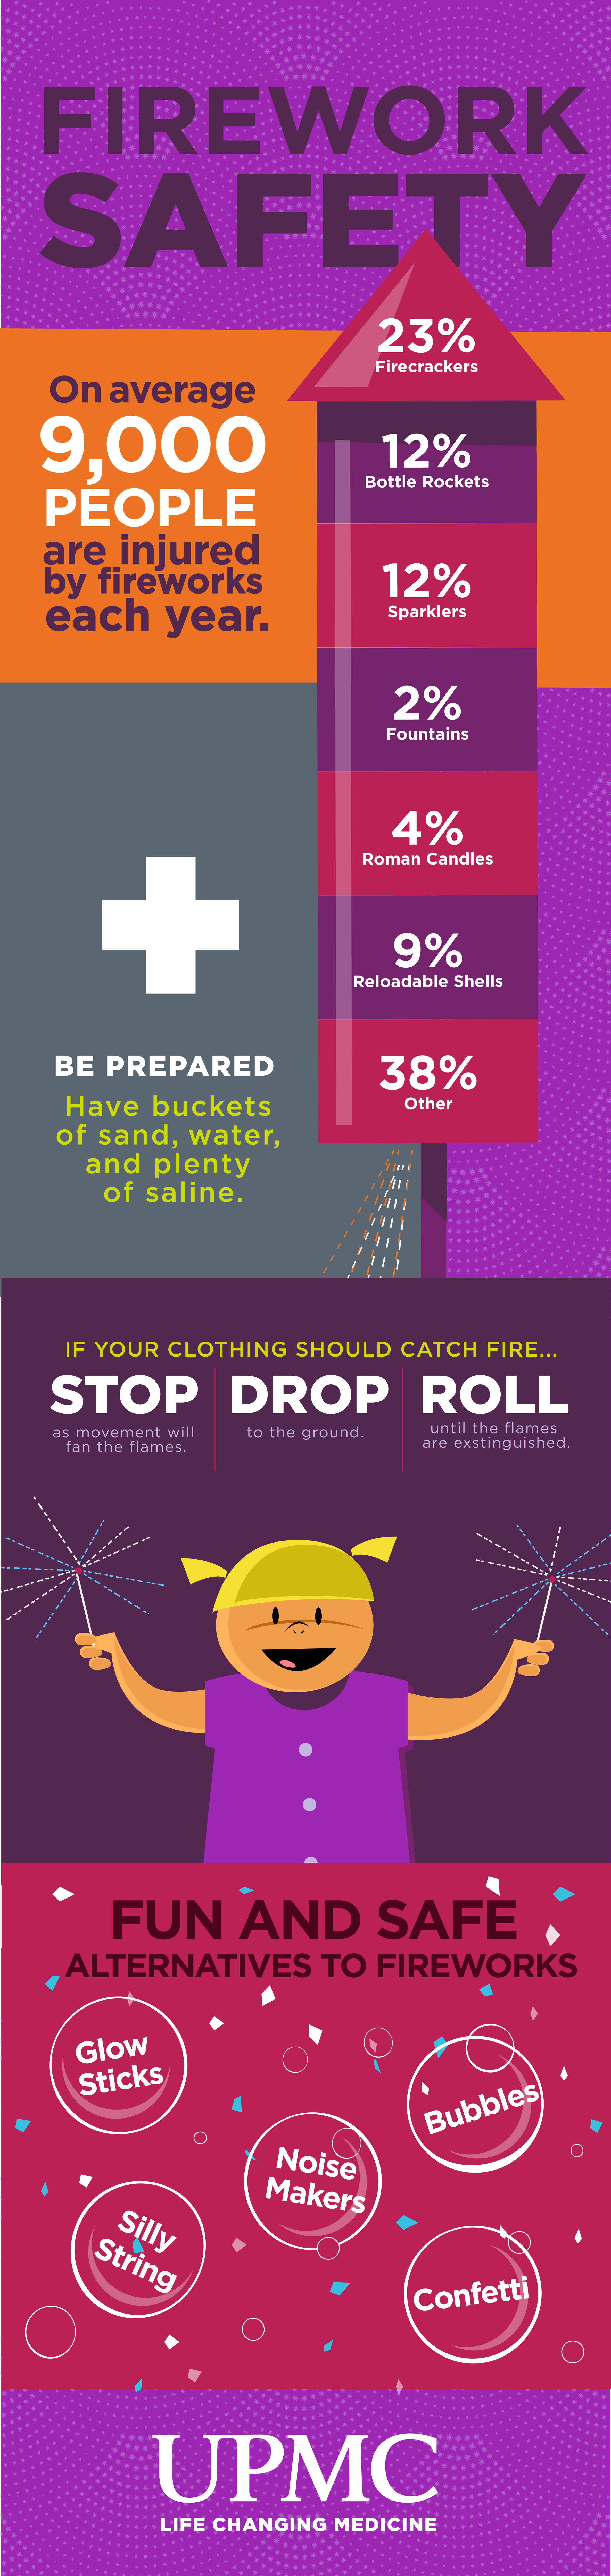 Learn more about fireworks safety